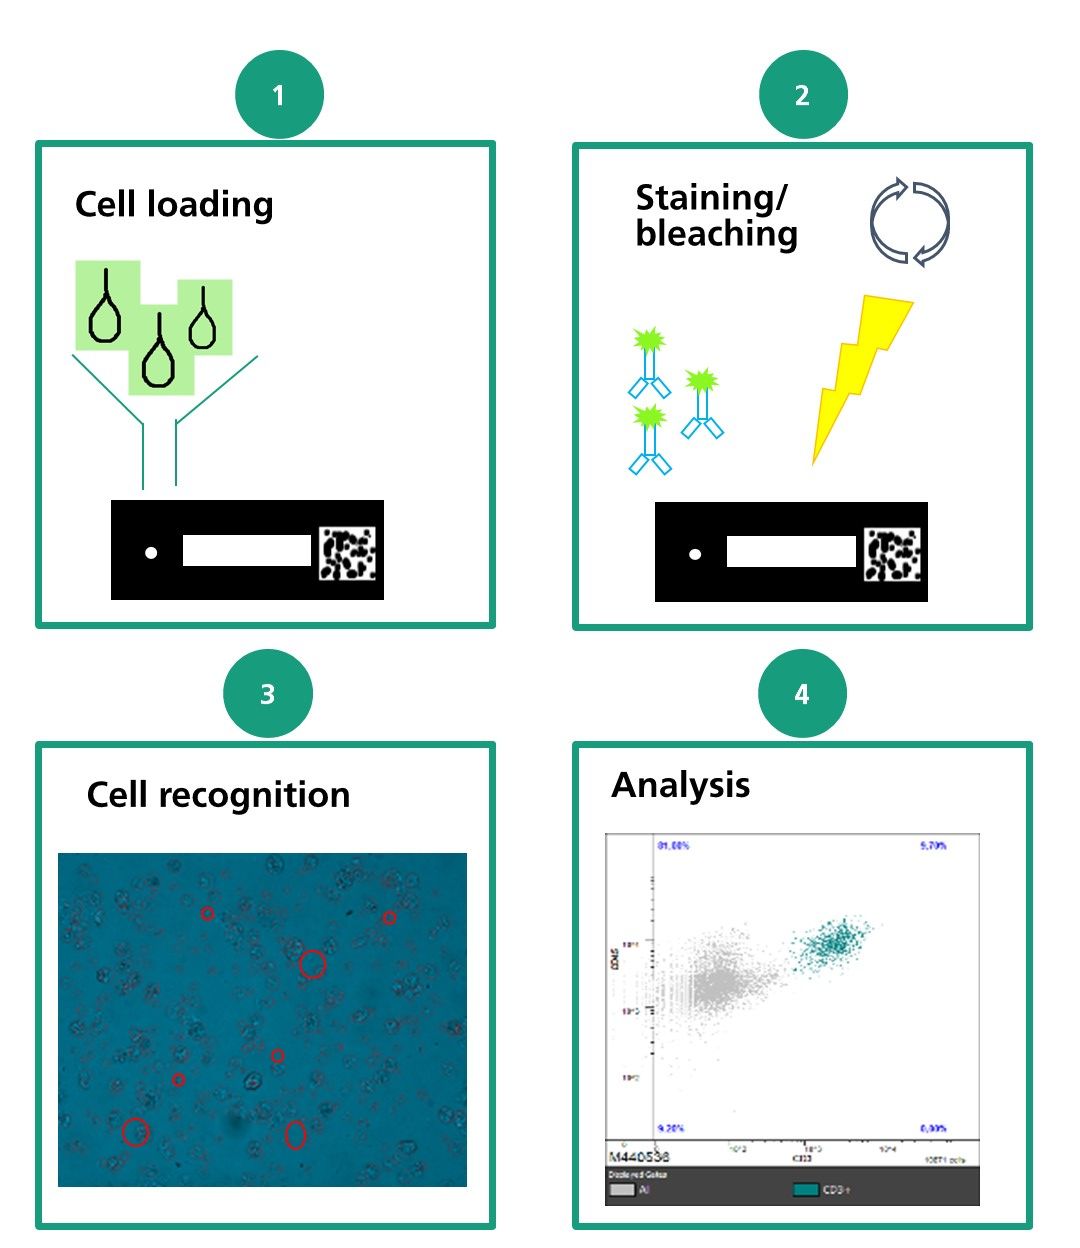 Chip cytometry consists of 4 steps: (1) cell loading, (2) staining/bleaching, (3) cell recognition, and (4) analysis.